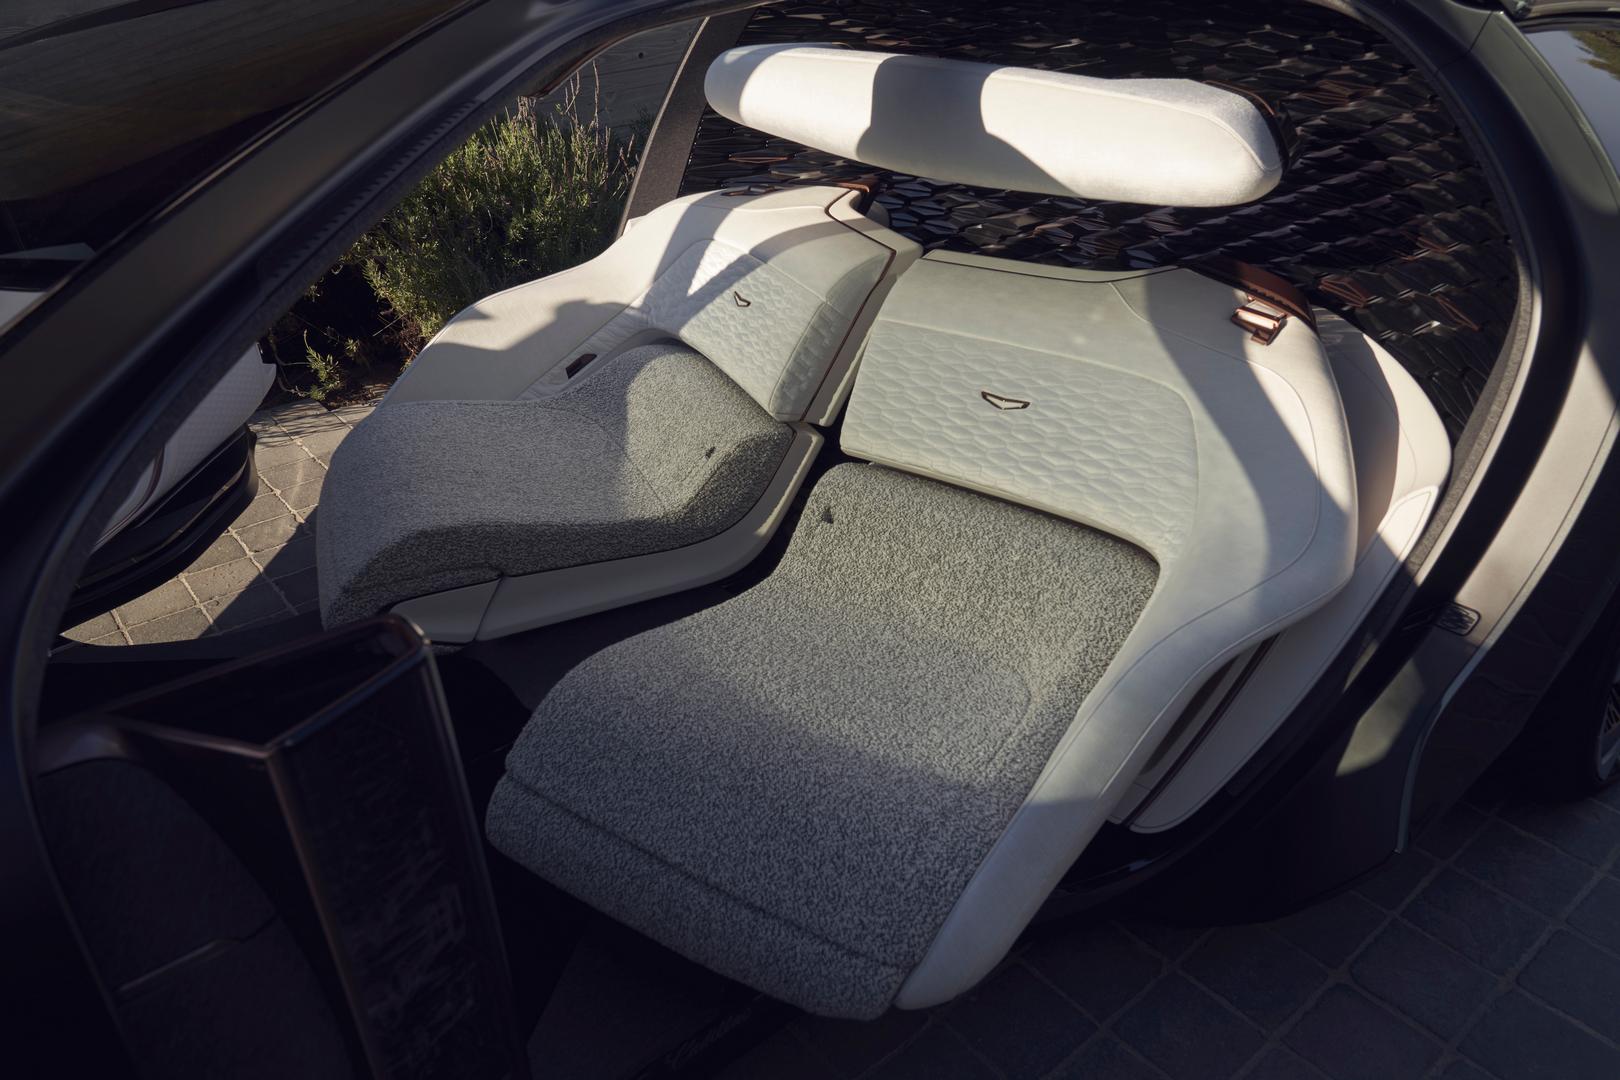 Cadillac Innerspace seats